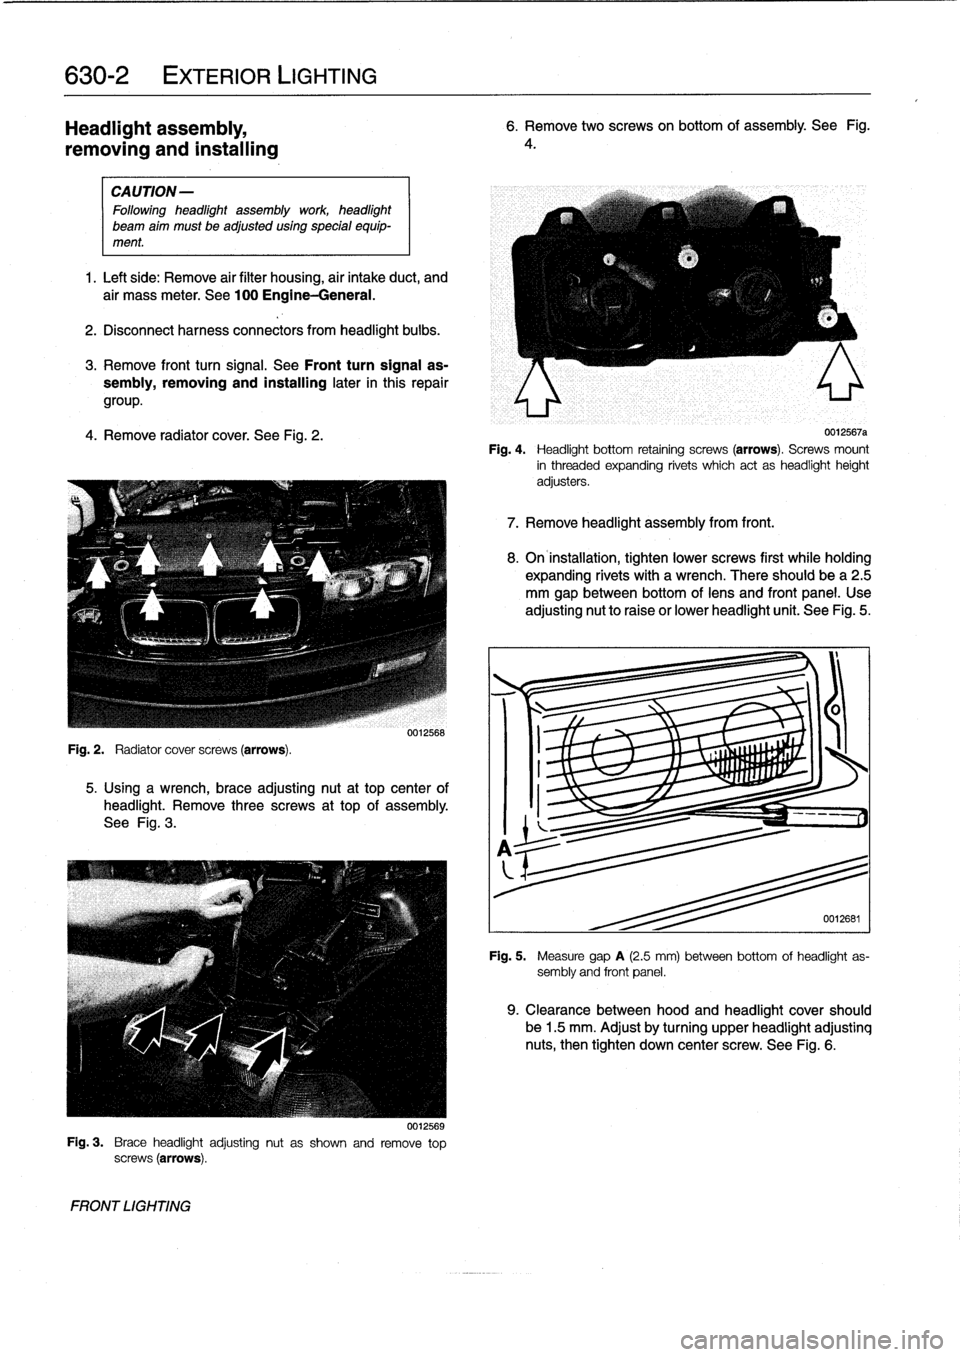 BMW M3 1993 E36 Workshop Manual 
630-2

	

EXTERIOR
LIGHTING

Headlight
assembly,

removing
and
installing

CAUTION-

Followingheadlight
assembly
work
headlight

beam
aim
must
be
adjusted
using
special
equip-
ment
.

1
.
Left
side
: